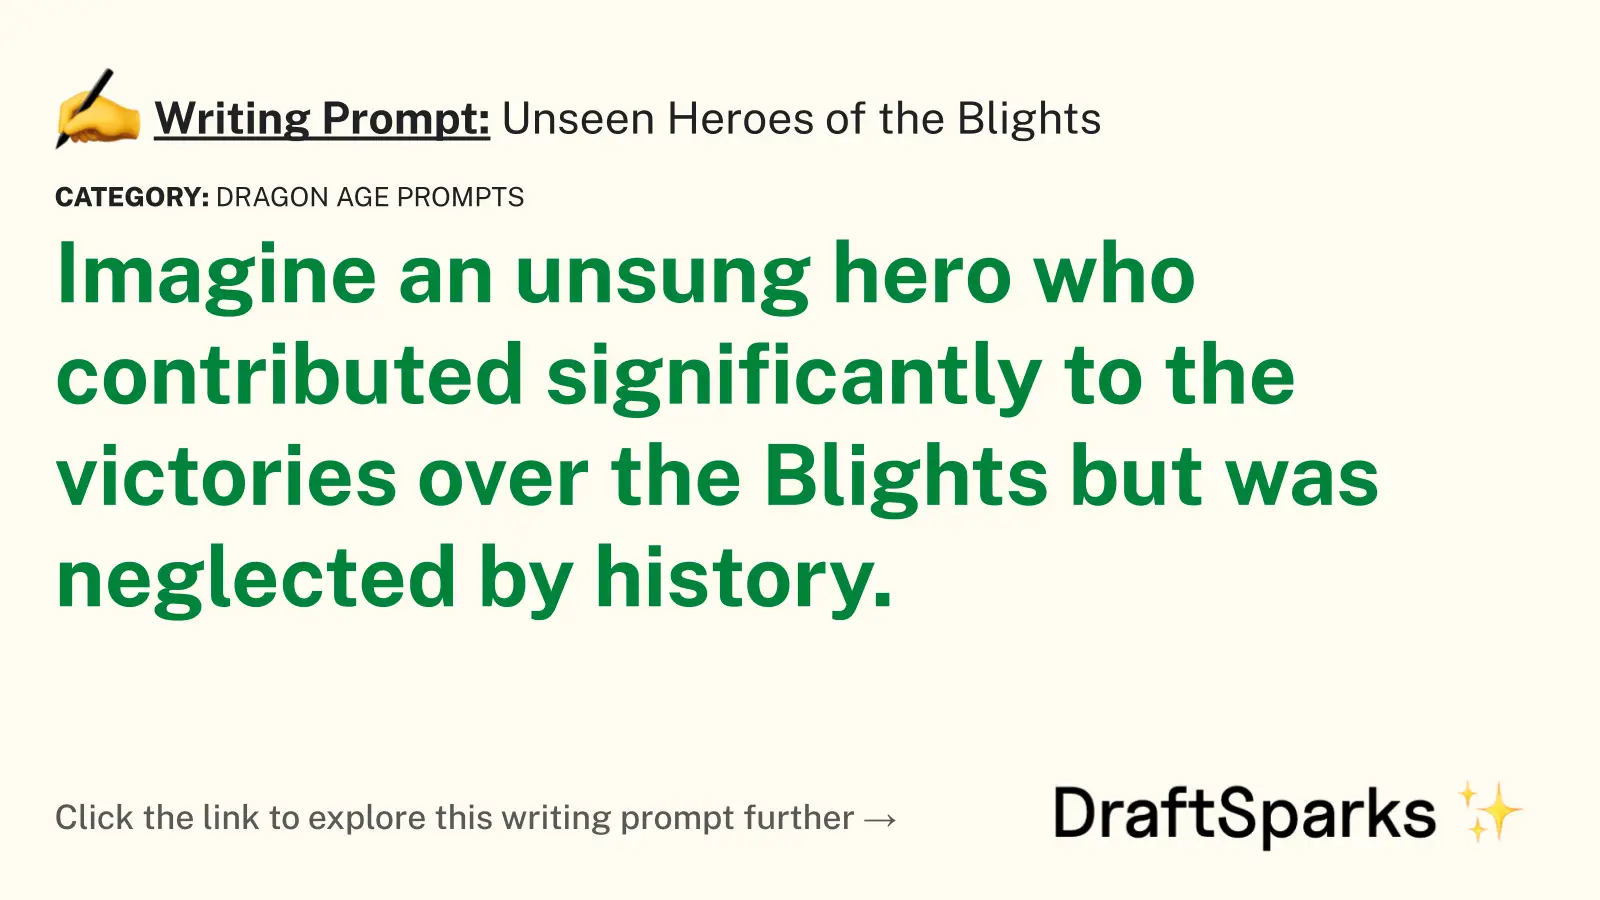 Unseen Heroes of the Blights